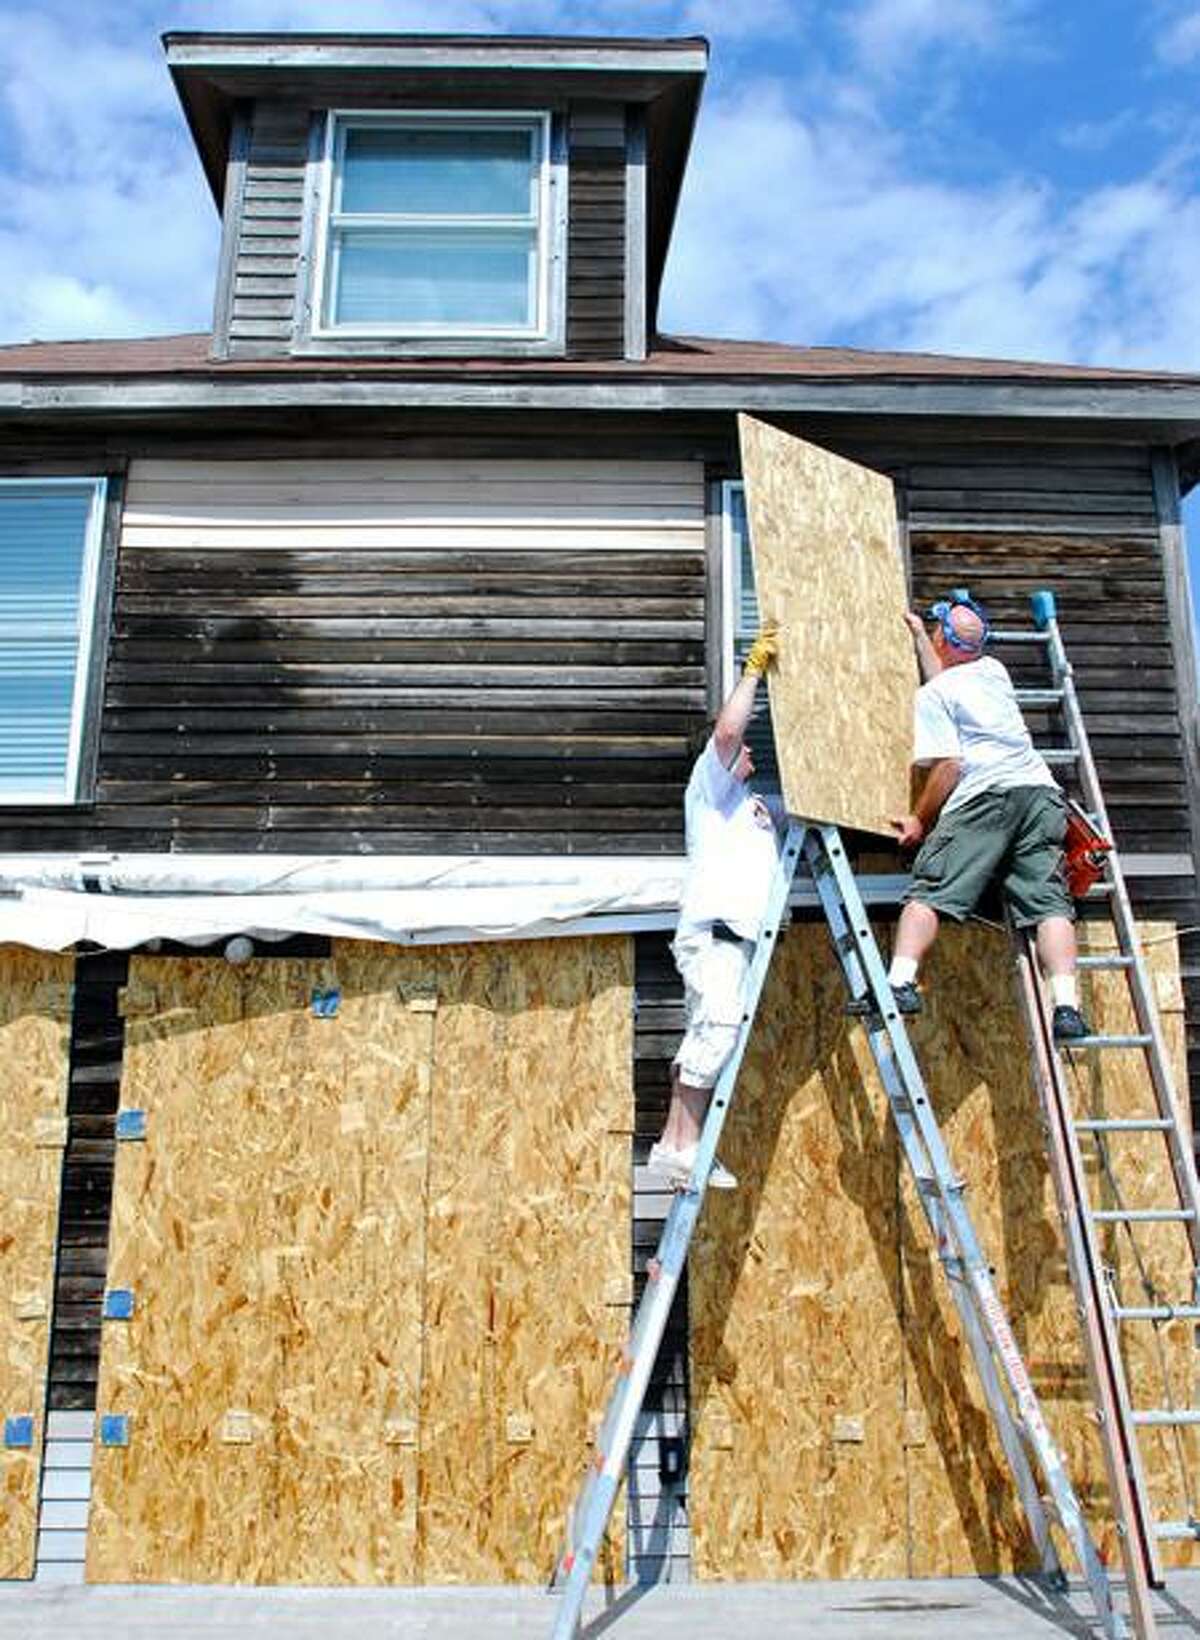 Frank Odice (right) and Scott Brewer (far right) of Affordable Handyman of Connecticut board up windows with plywood in the back of a home on East Broadway in Milford on Friday 8/26/2011. The home is located on the beach next to Silver Sands State Park and faces the Long Island Sound. Photo by Arnold Gold/New Haven Register